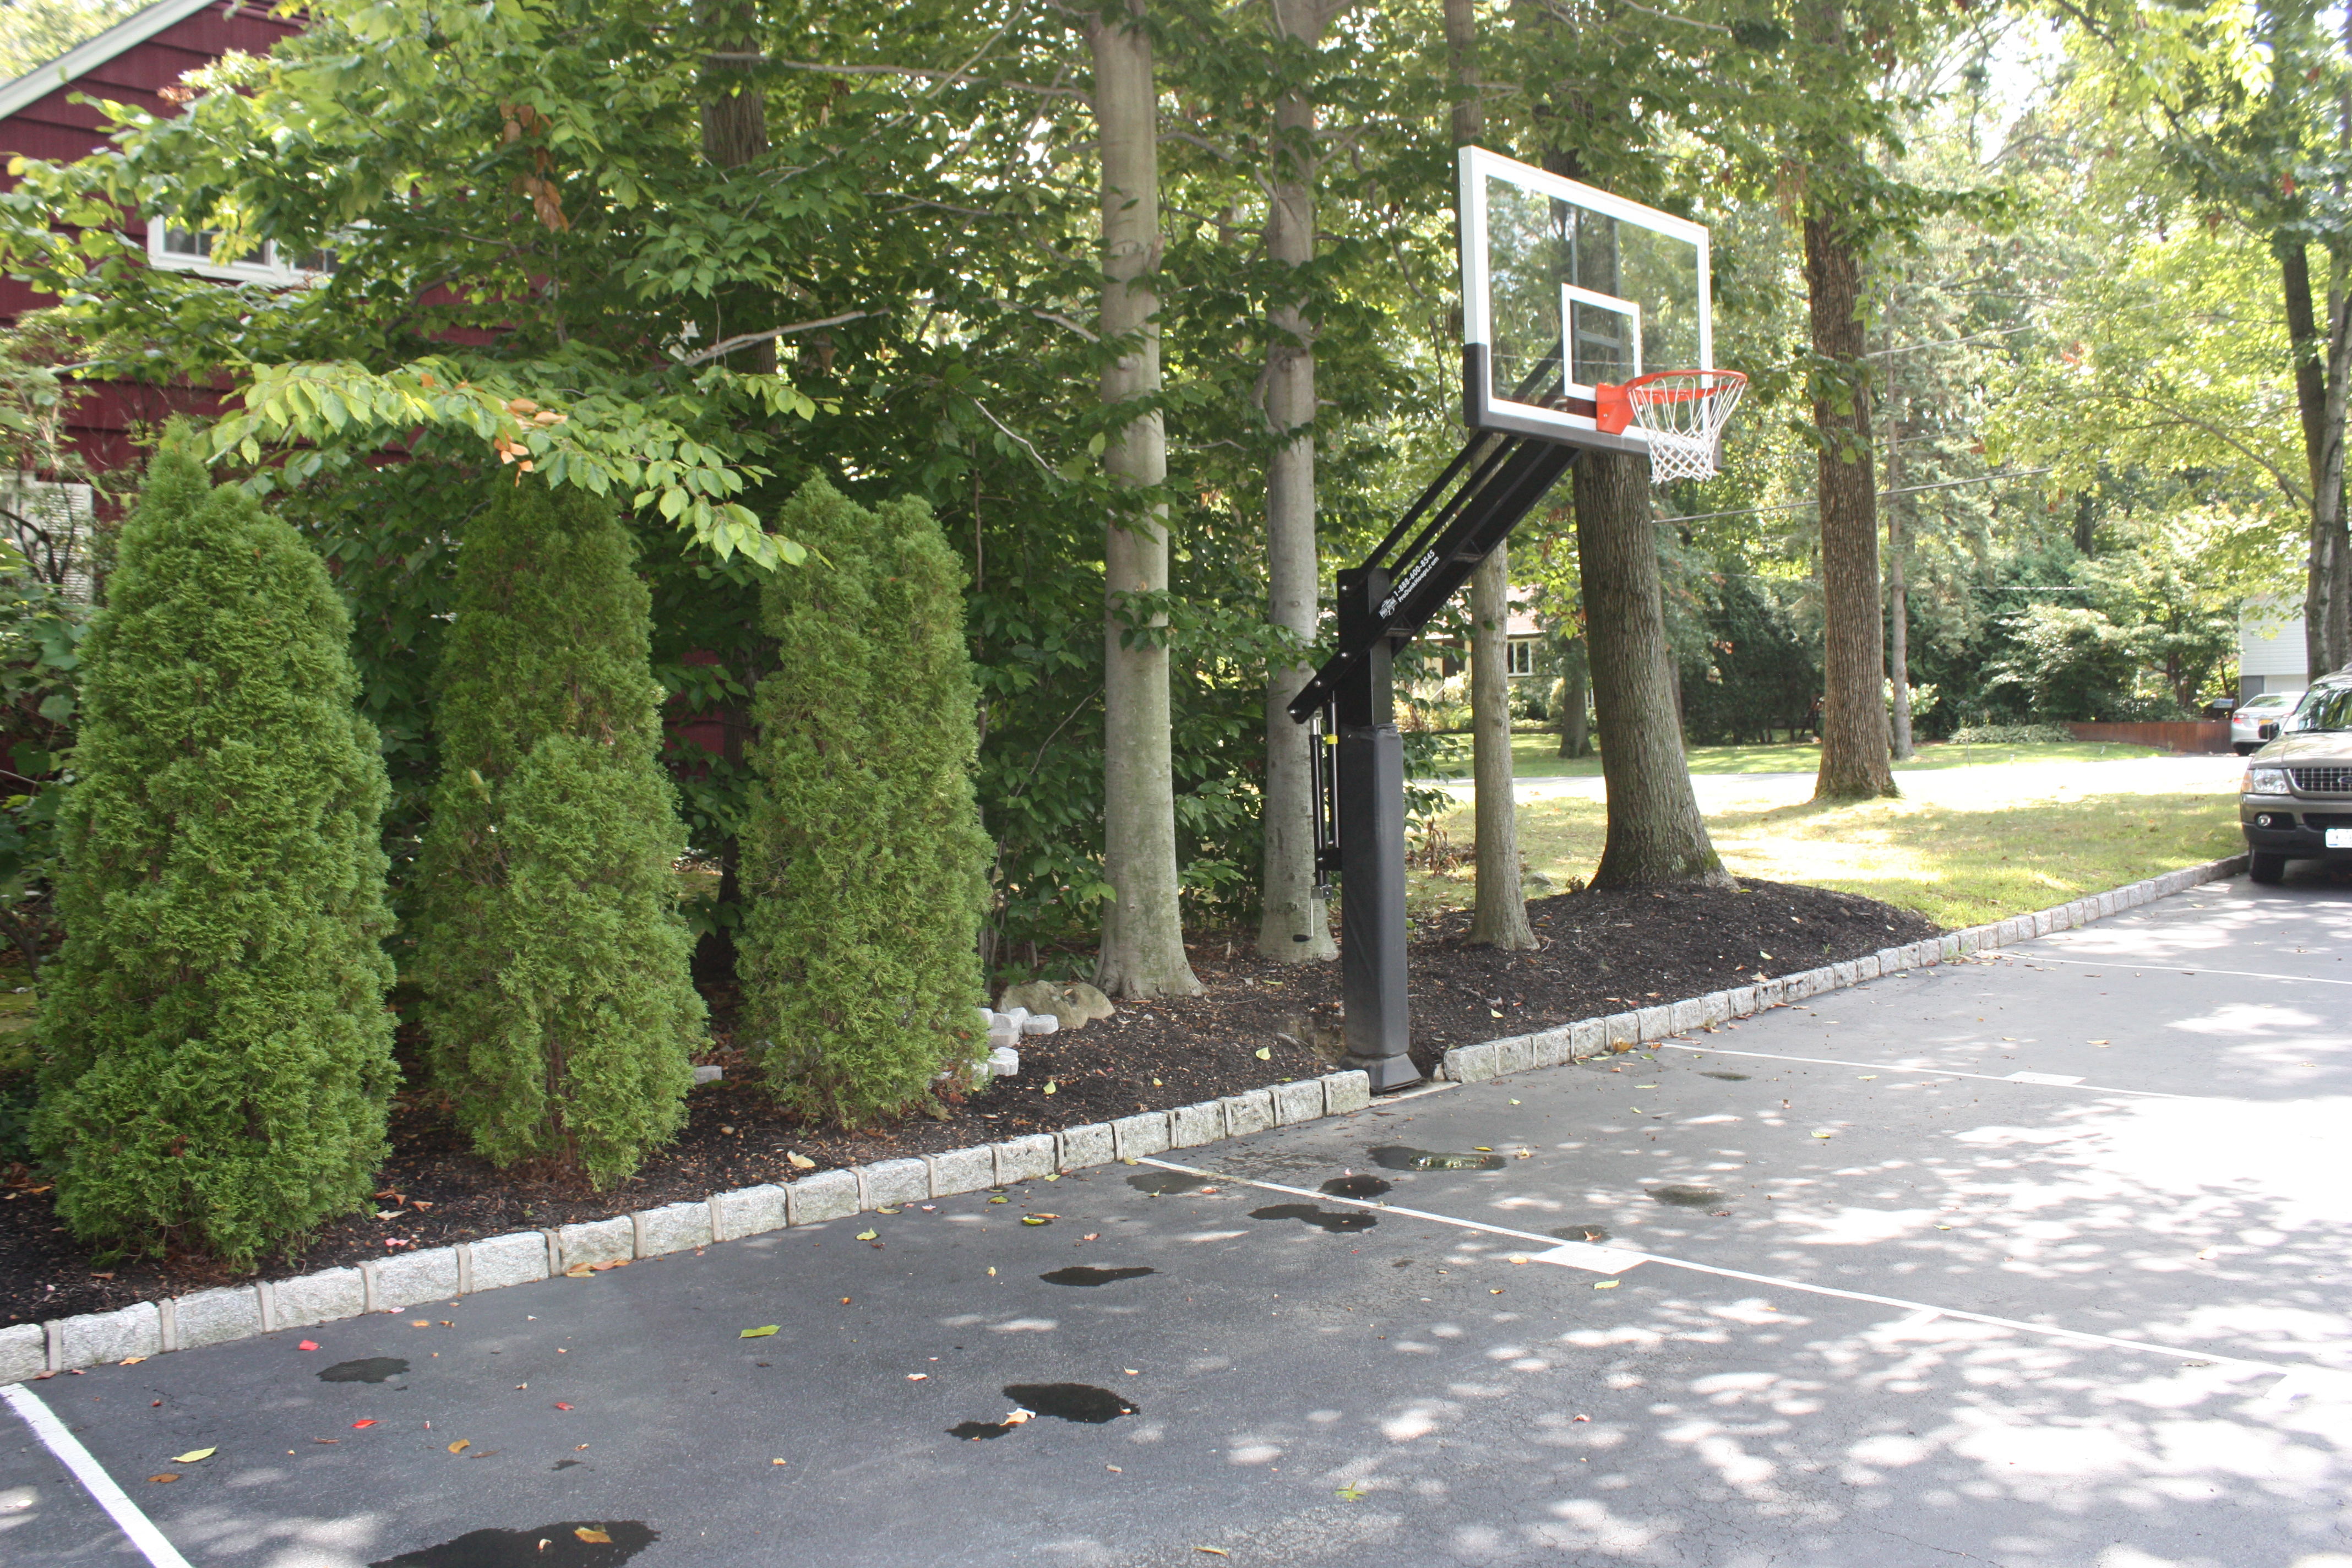 The Pro Dunk Platinum system is installed right off this asphalt court maximizing the safe play overhang of four feet.